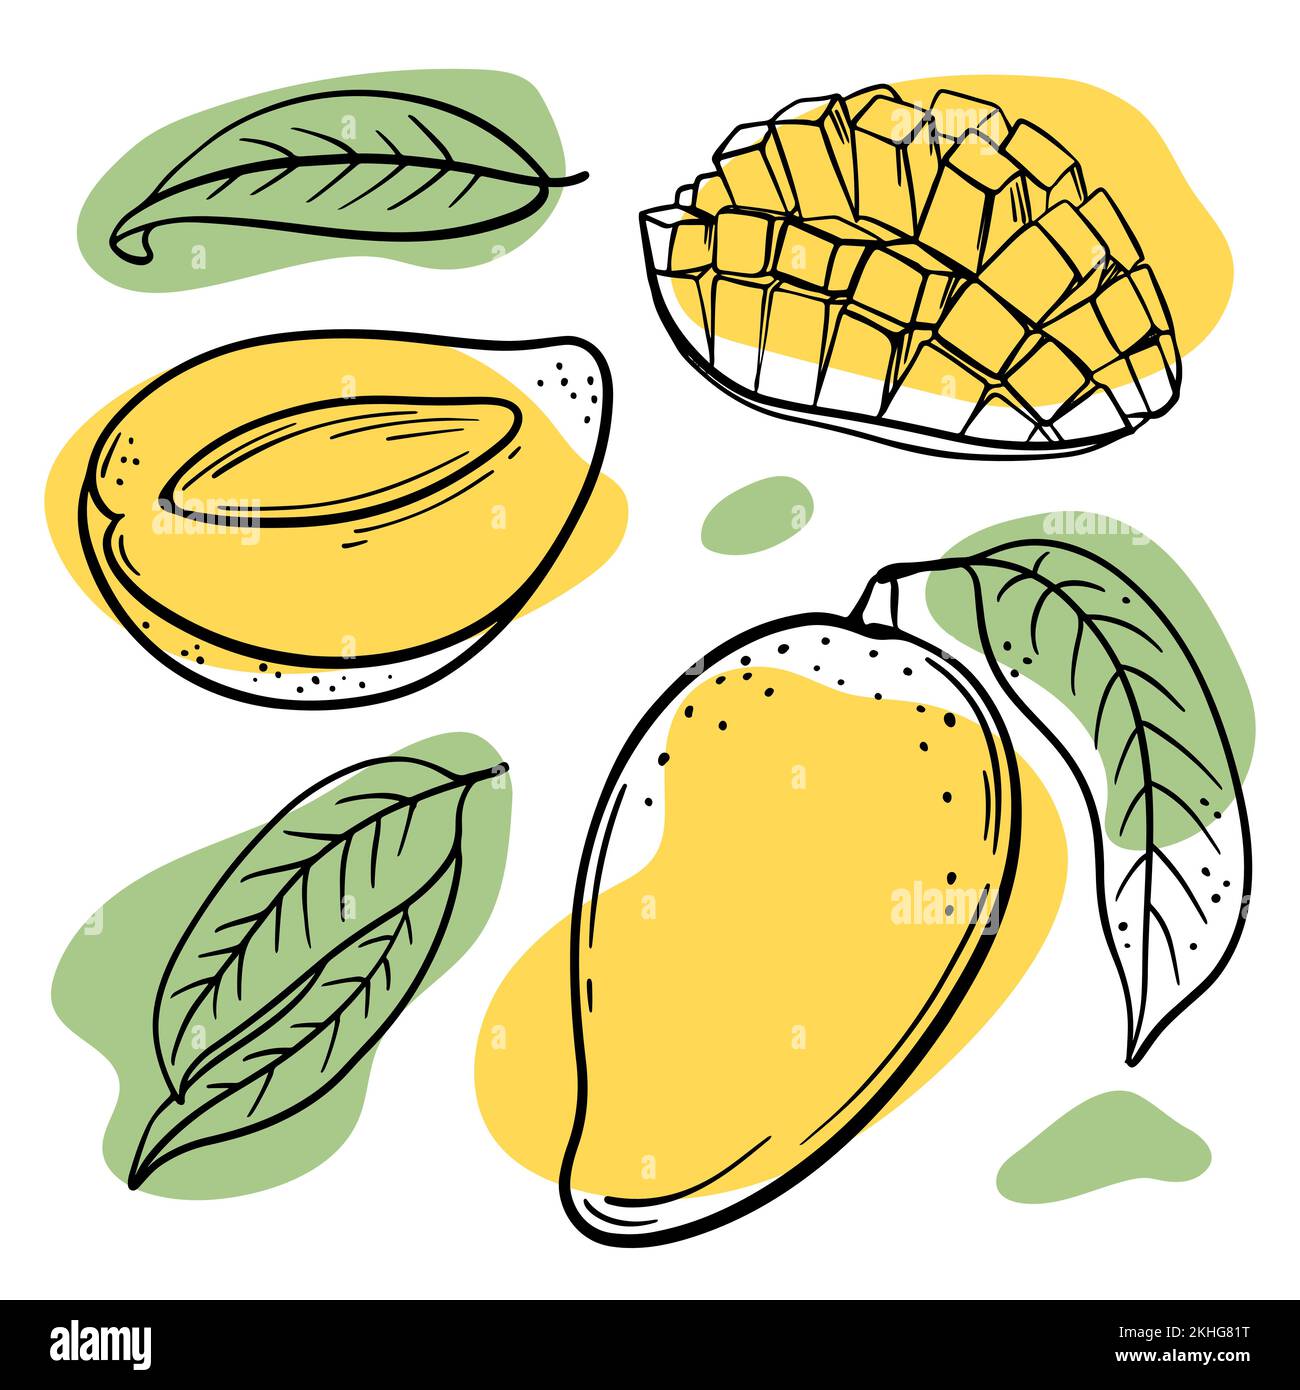 FRESH MANGO Abstract Delicious Tropical Fruits With Leaves And Cut In Half For Design Your Store And Restaurant Menu Hand Drawn In Sketch Vector Illus Stock Vector